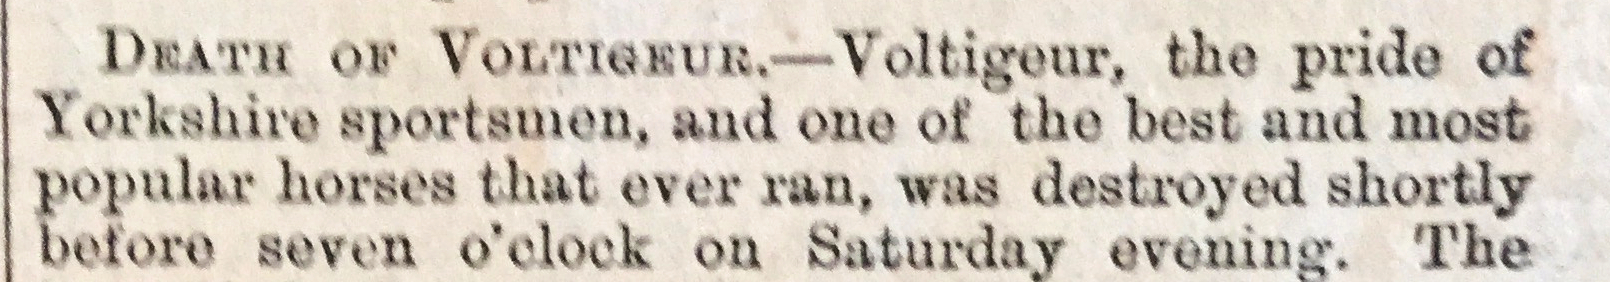 How the D&S Times reported the death of Voltigeur in February 1874